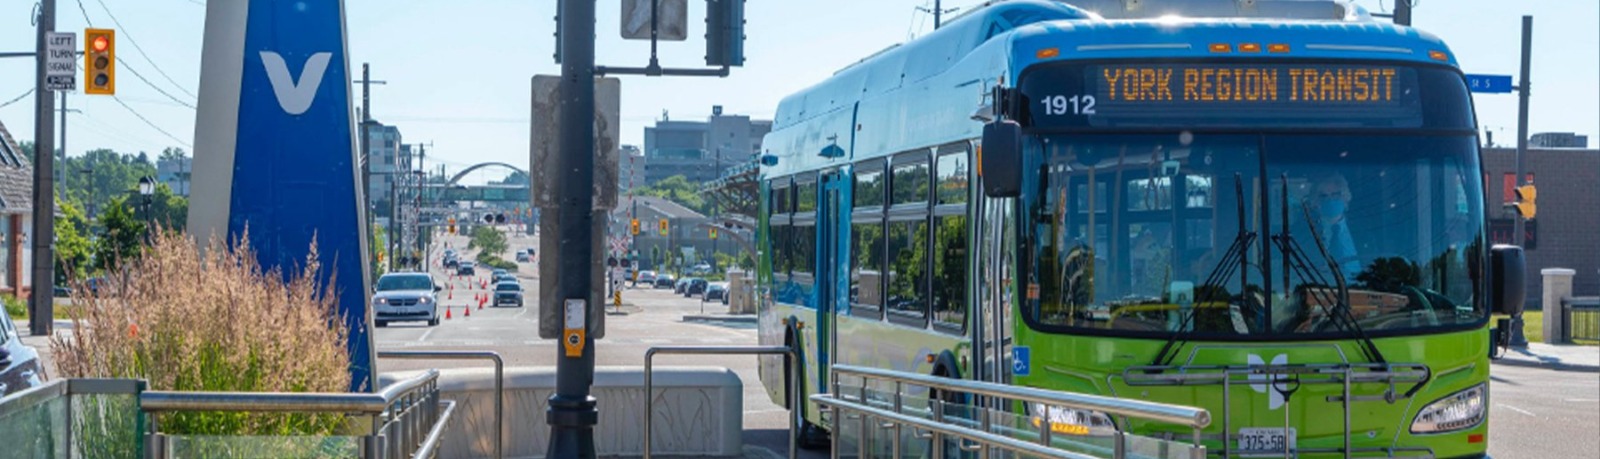 Image Banner of a YRT electric bus on the rapidway